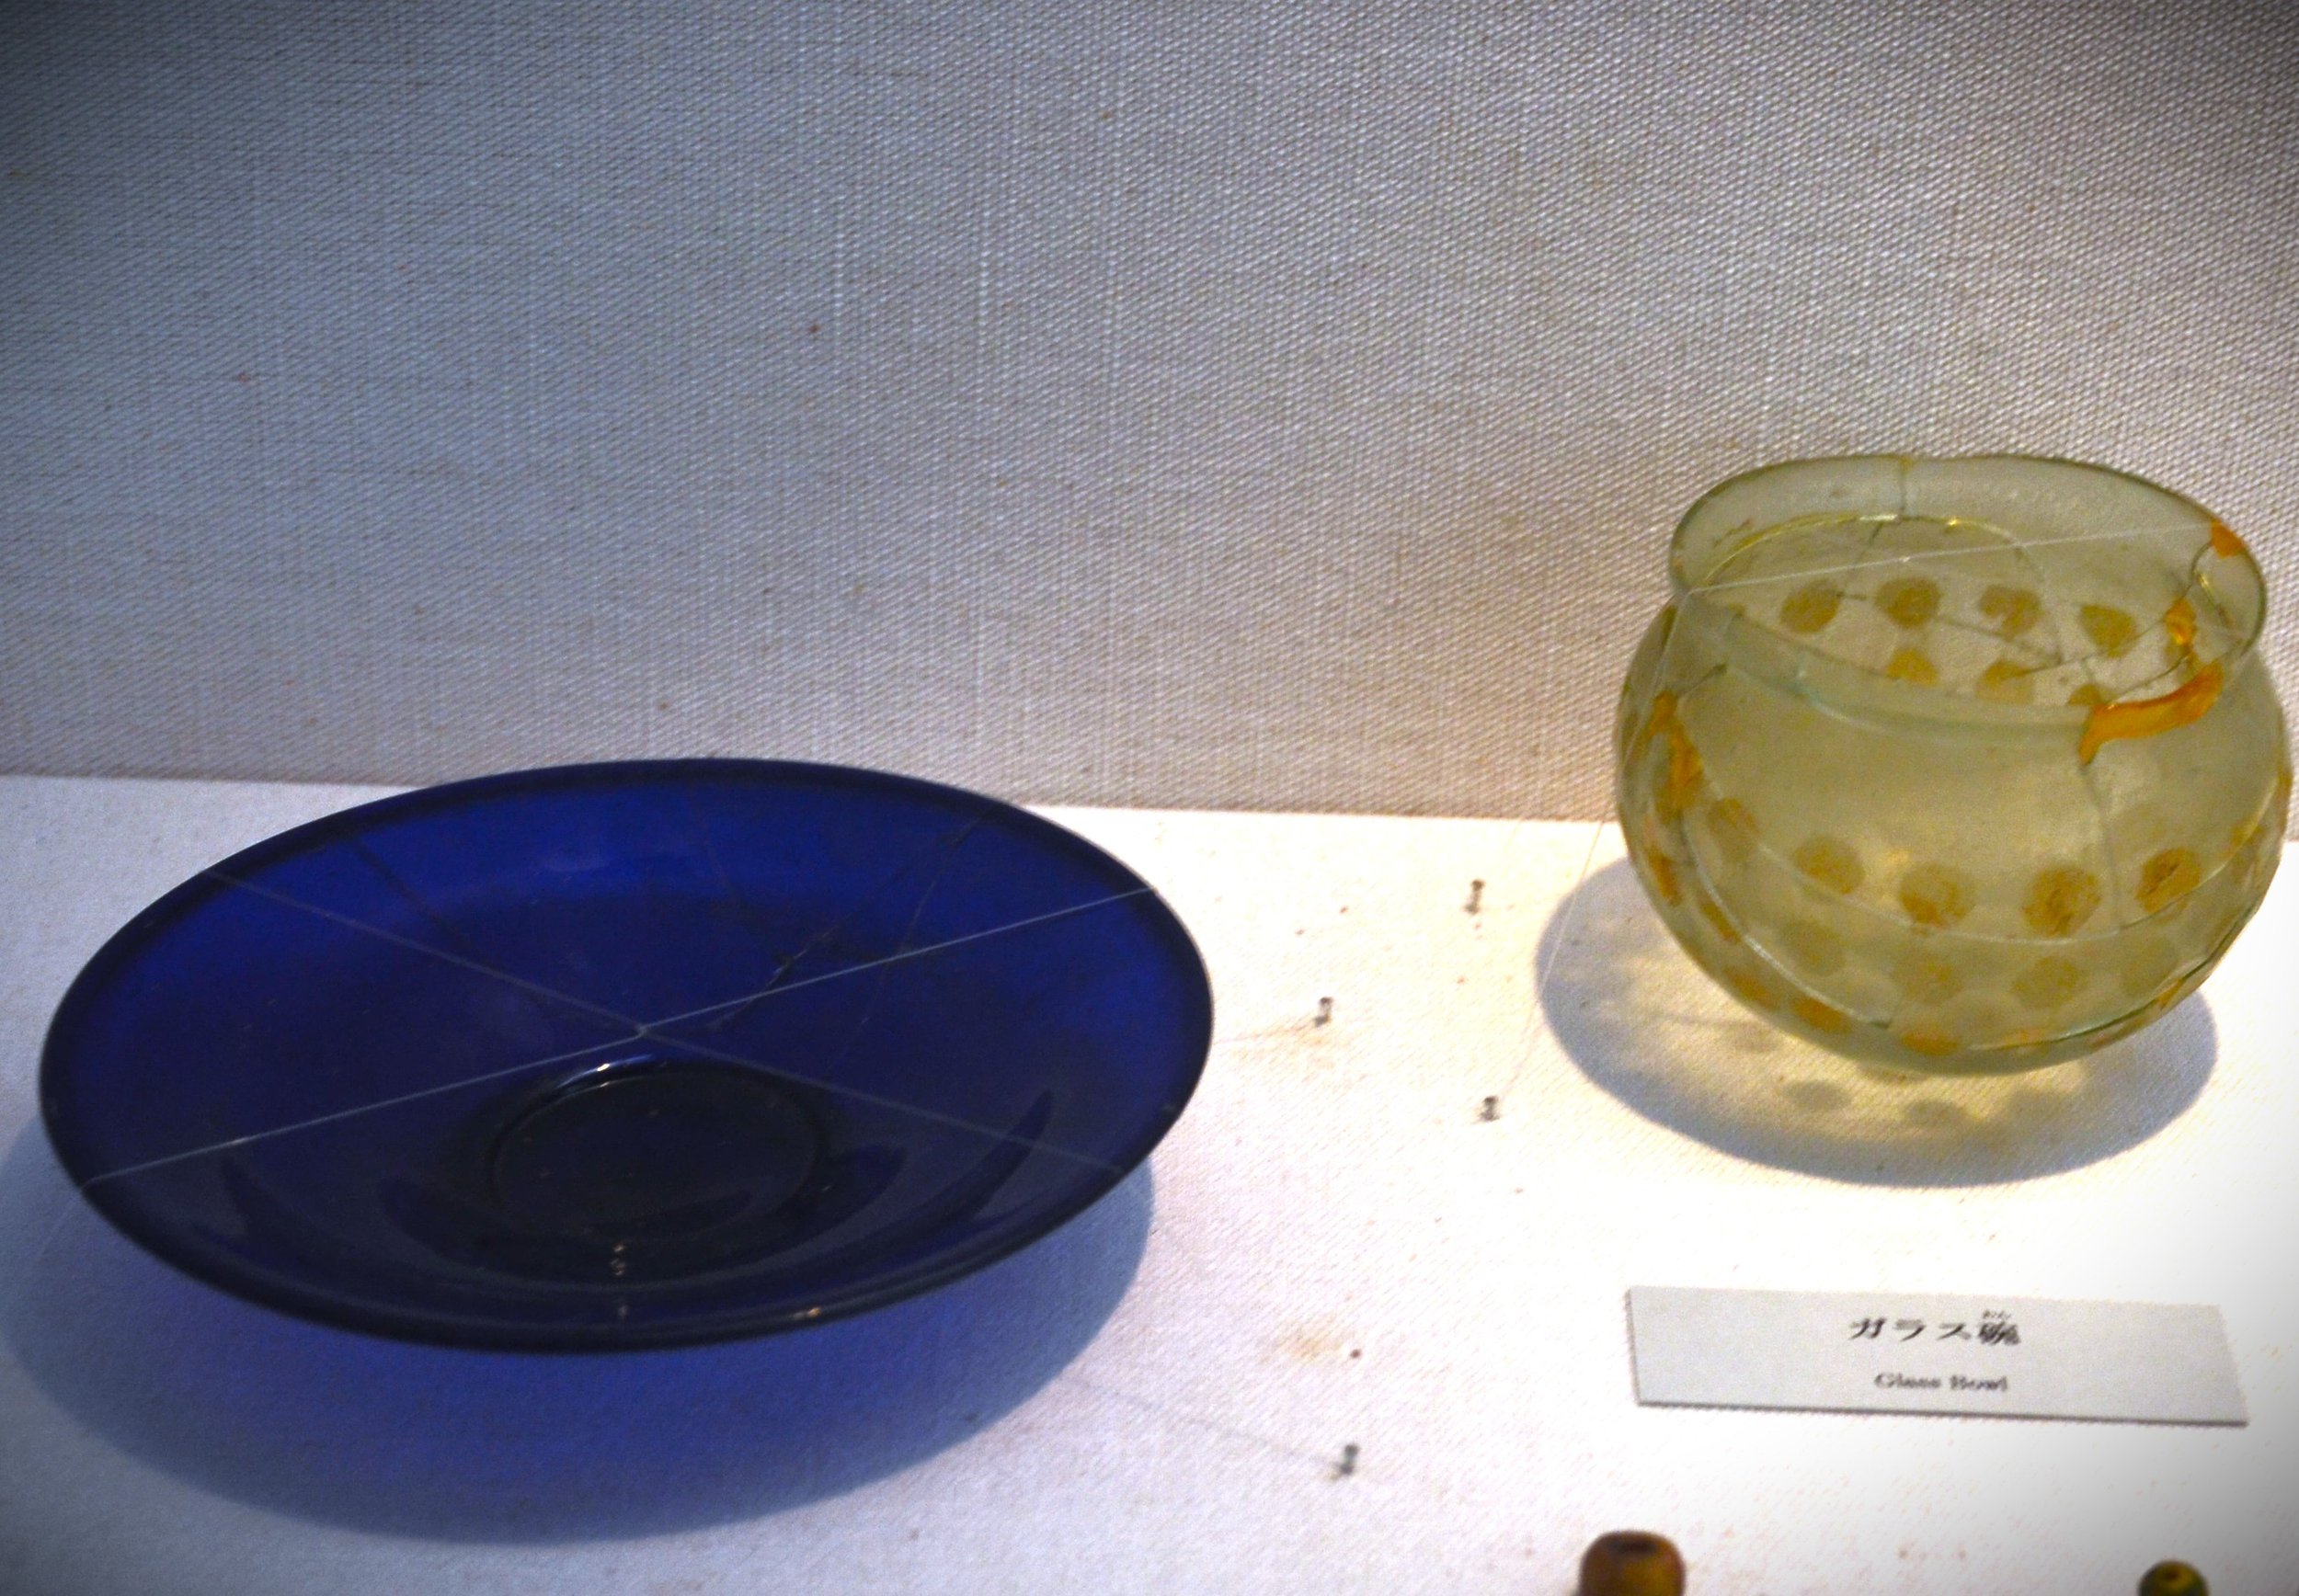 Glass plate and bowl